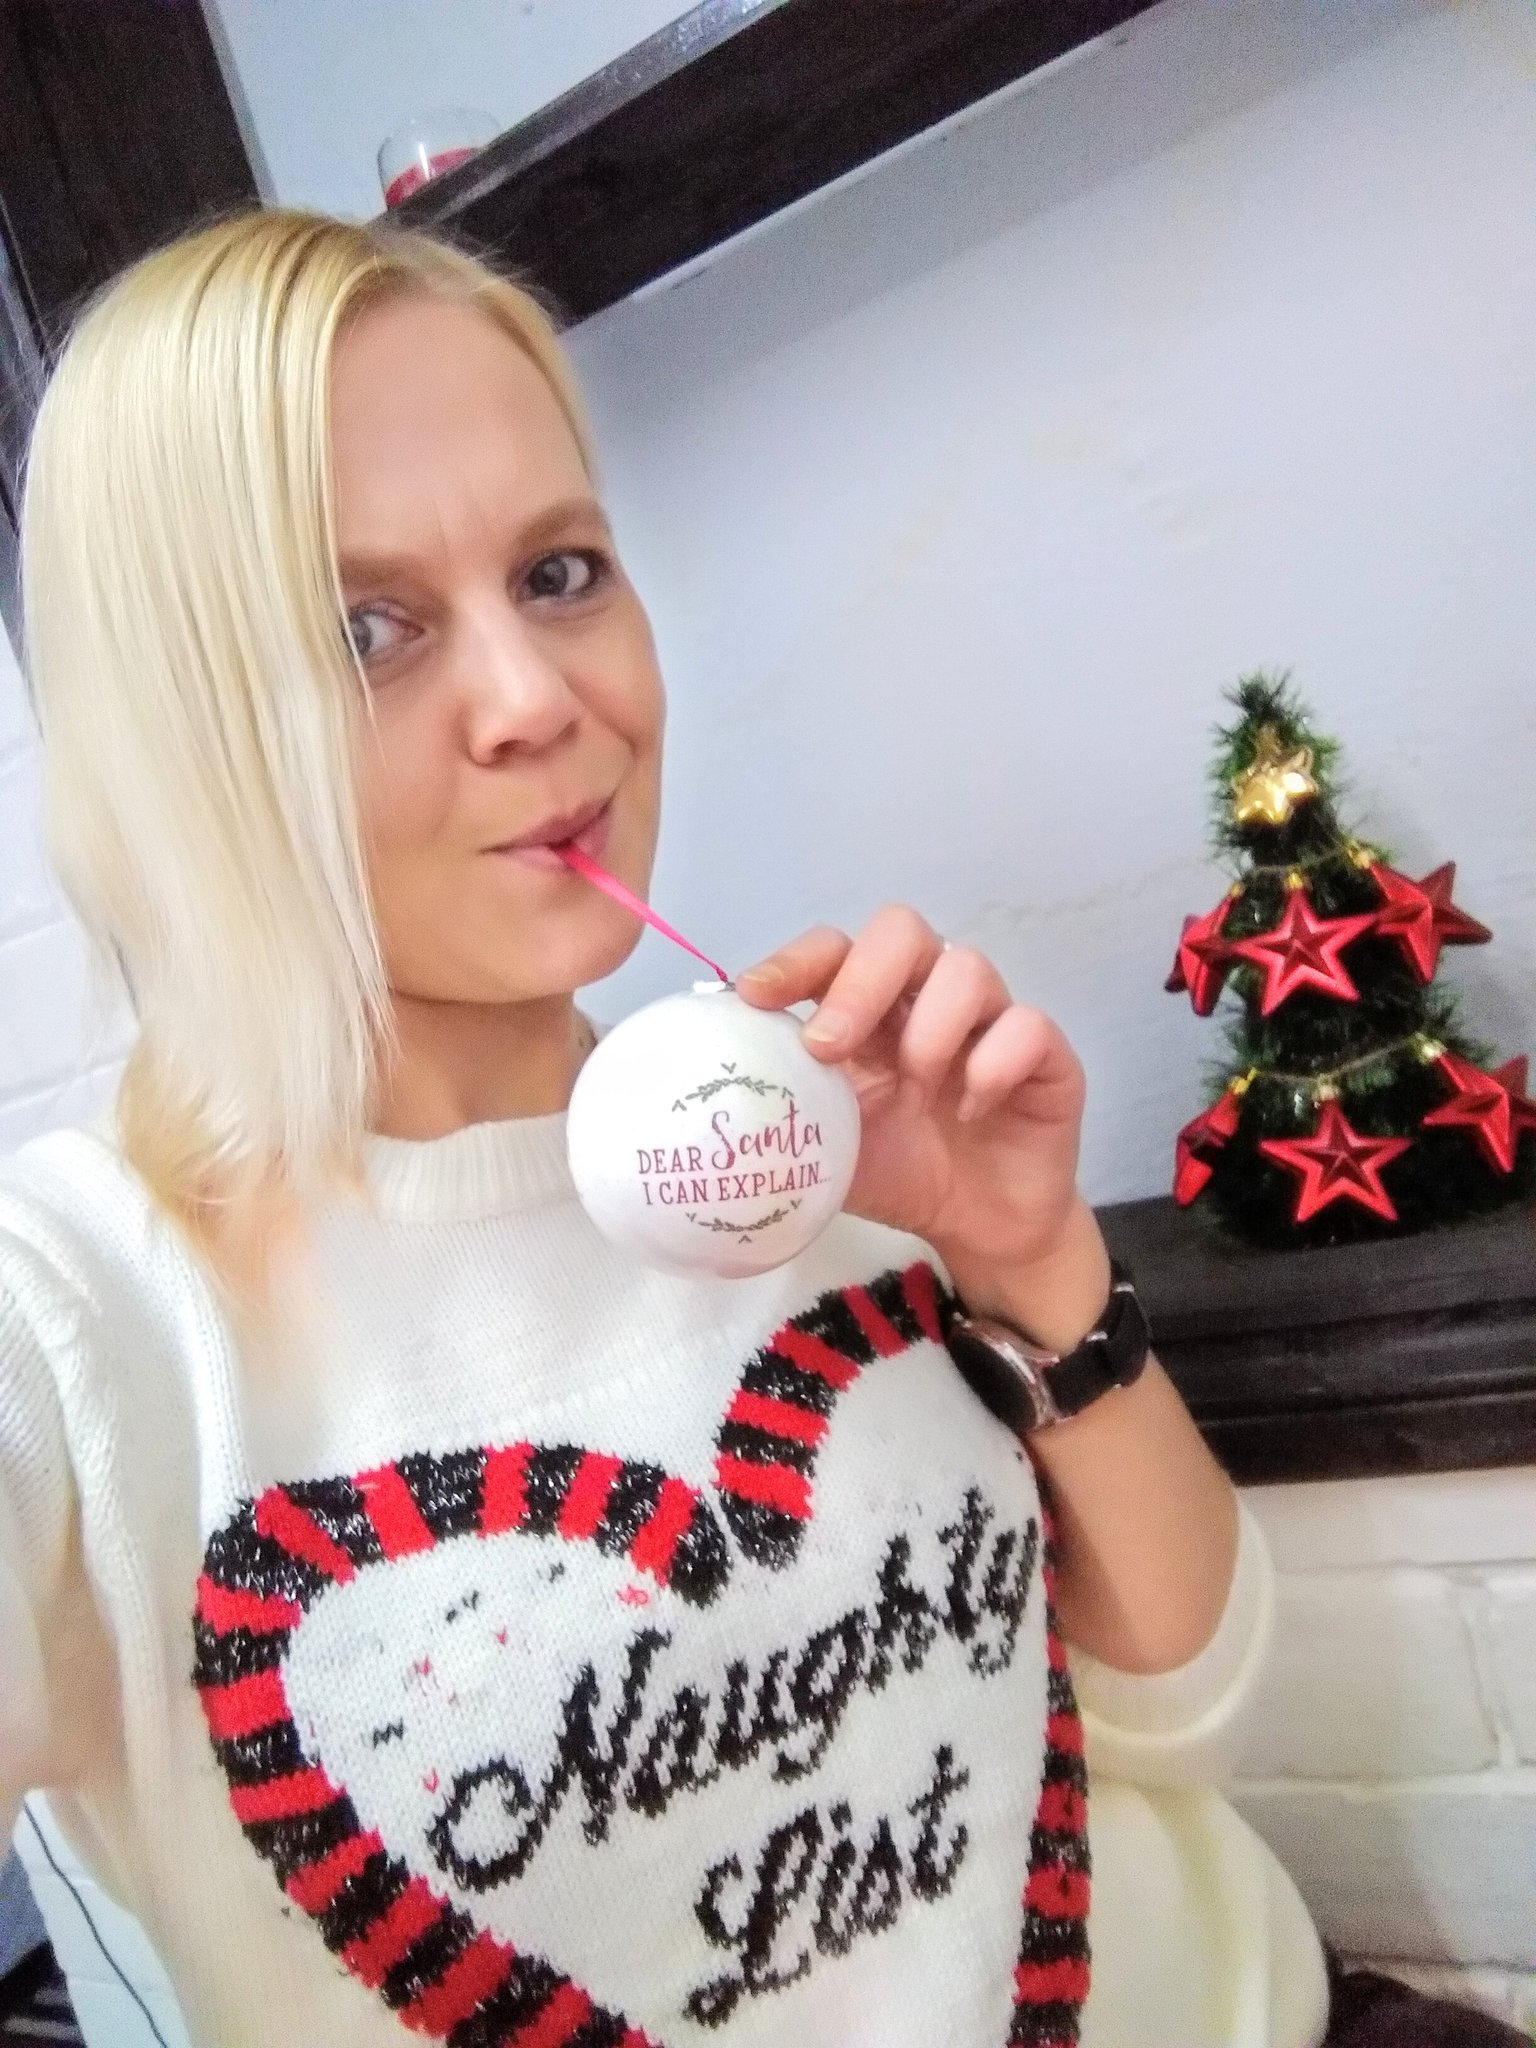 Tw Pornstars Cameron Amor Xxx Twitter Today S The Day The Christmas Jumpers Cane Out To Play